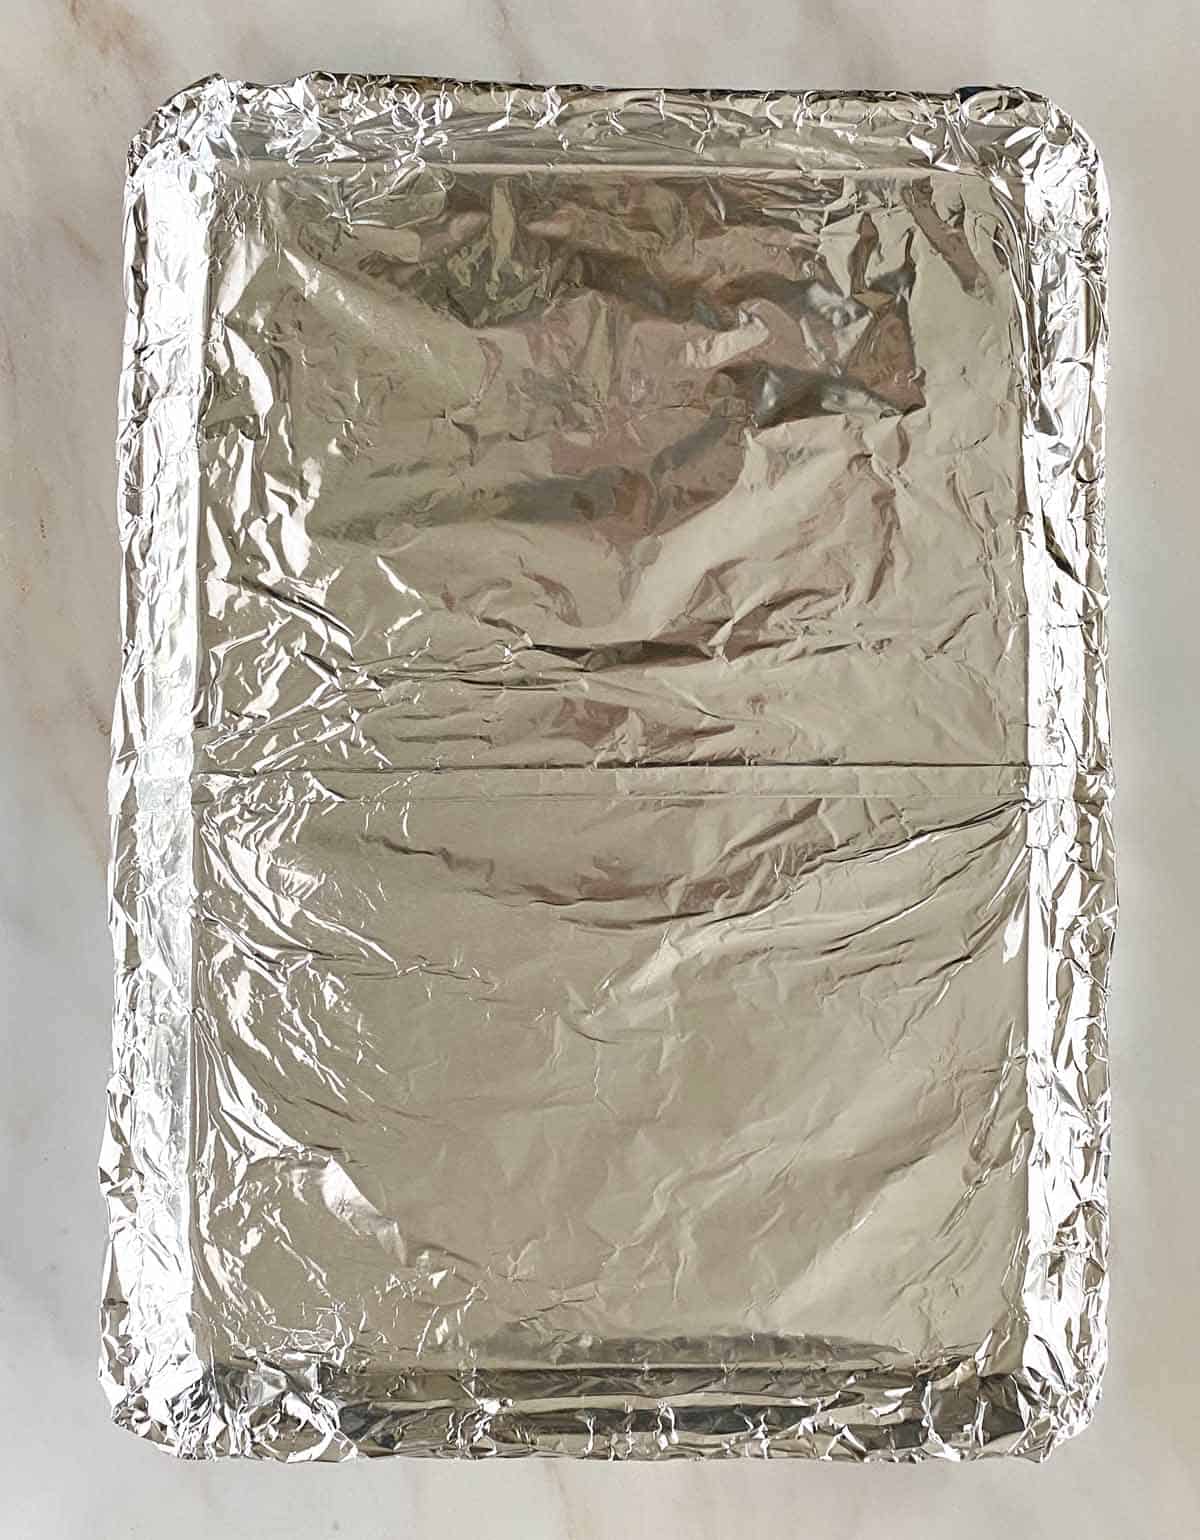 A baking sheet lined with aluminum foil, with a seam down the middle.